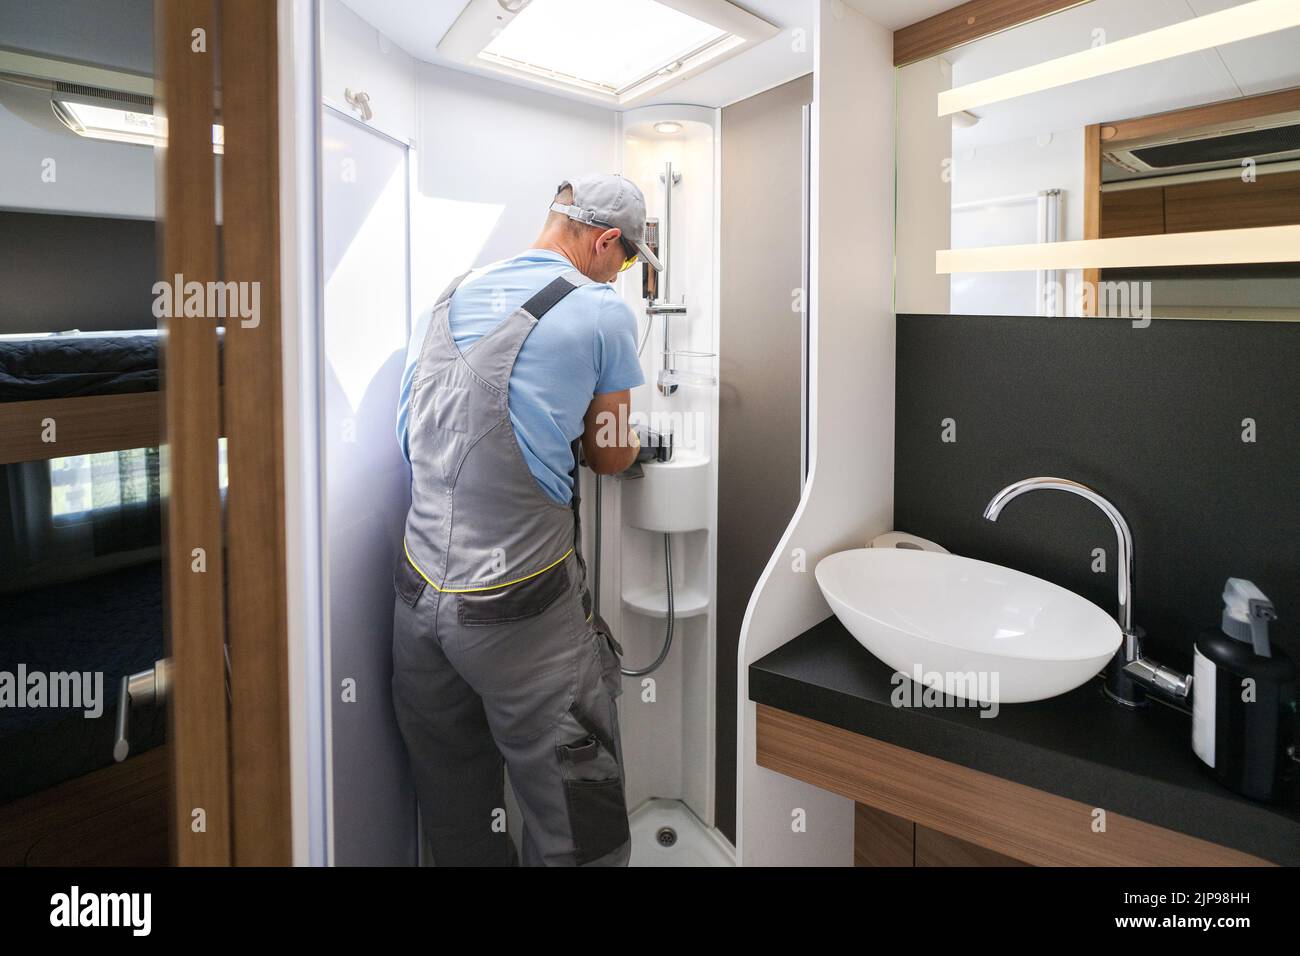 Rear View of Caucasian Worker in Grey Uniform Repairing the Hand Shower in Recreational Vehicle Bathroom. RV Care and Maintenance Theme. Stock Photo